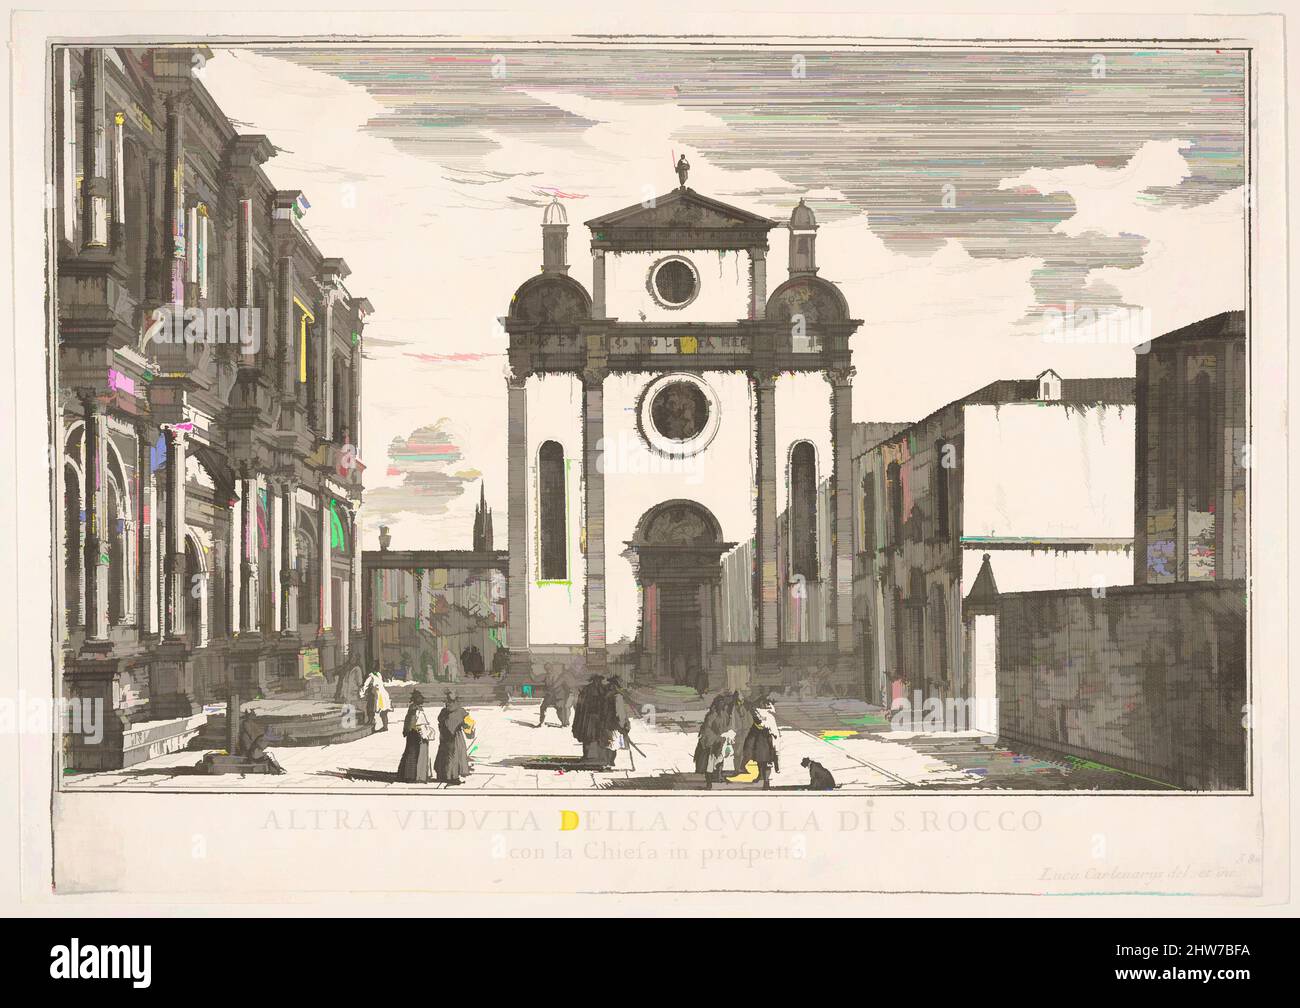 Art inspired by Plate 38: View of the facade of the church of St. Roch and at left the facade of the School of St. Roch, Venice, 1703, from the series 'The buildings and views of Venice' (Le fabriche e vedute di Venezia), 1703, Etching, plate: 8 1/4 x 11 5/8 in. (21 x 29.5 cm), Luca, Classic works modernized by Artotop with a splash of modernity. Shapes, color and value, eye-catching visual impact on art. Emotions through freedom of artworks in a contemporary way. A timeless message pursuing a wildly creative new direction. Artists turning to the digital medium and creating the Artotop NFT Stock Photo